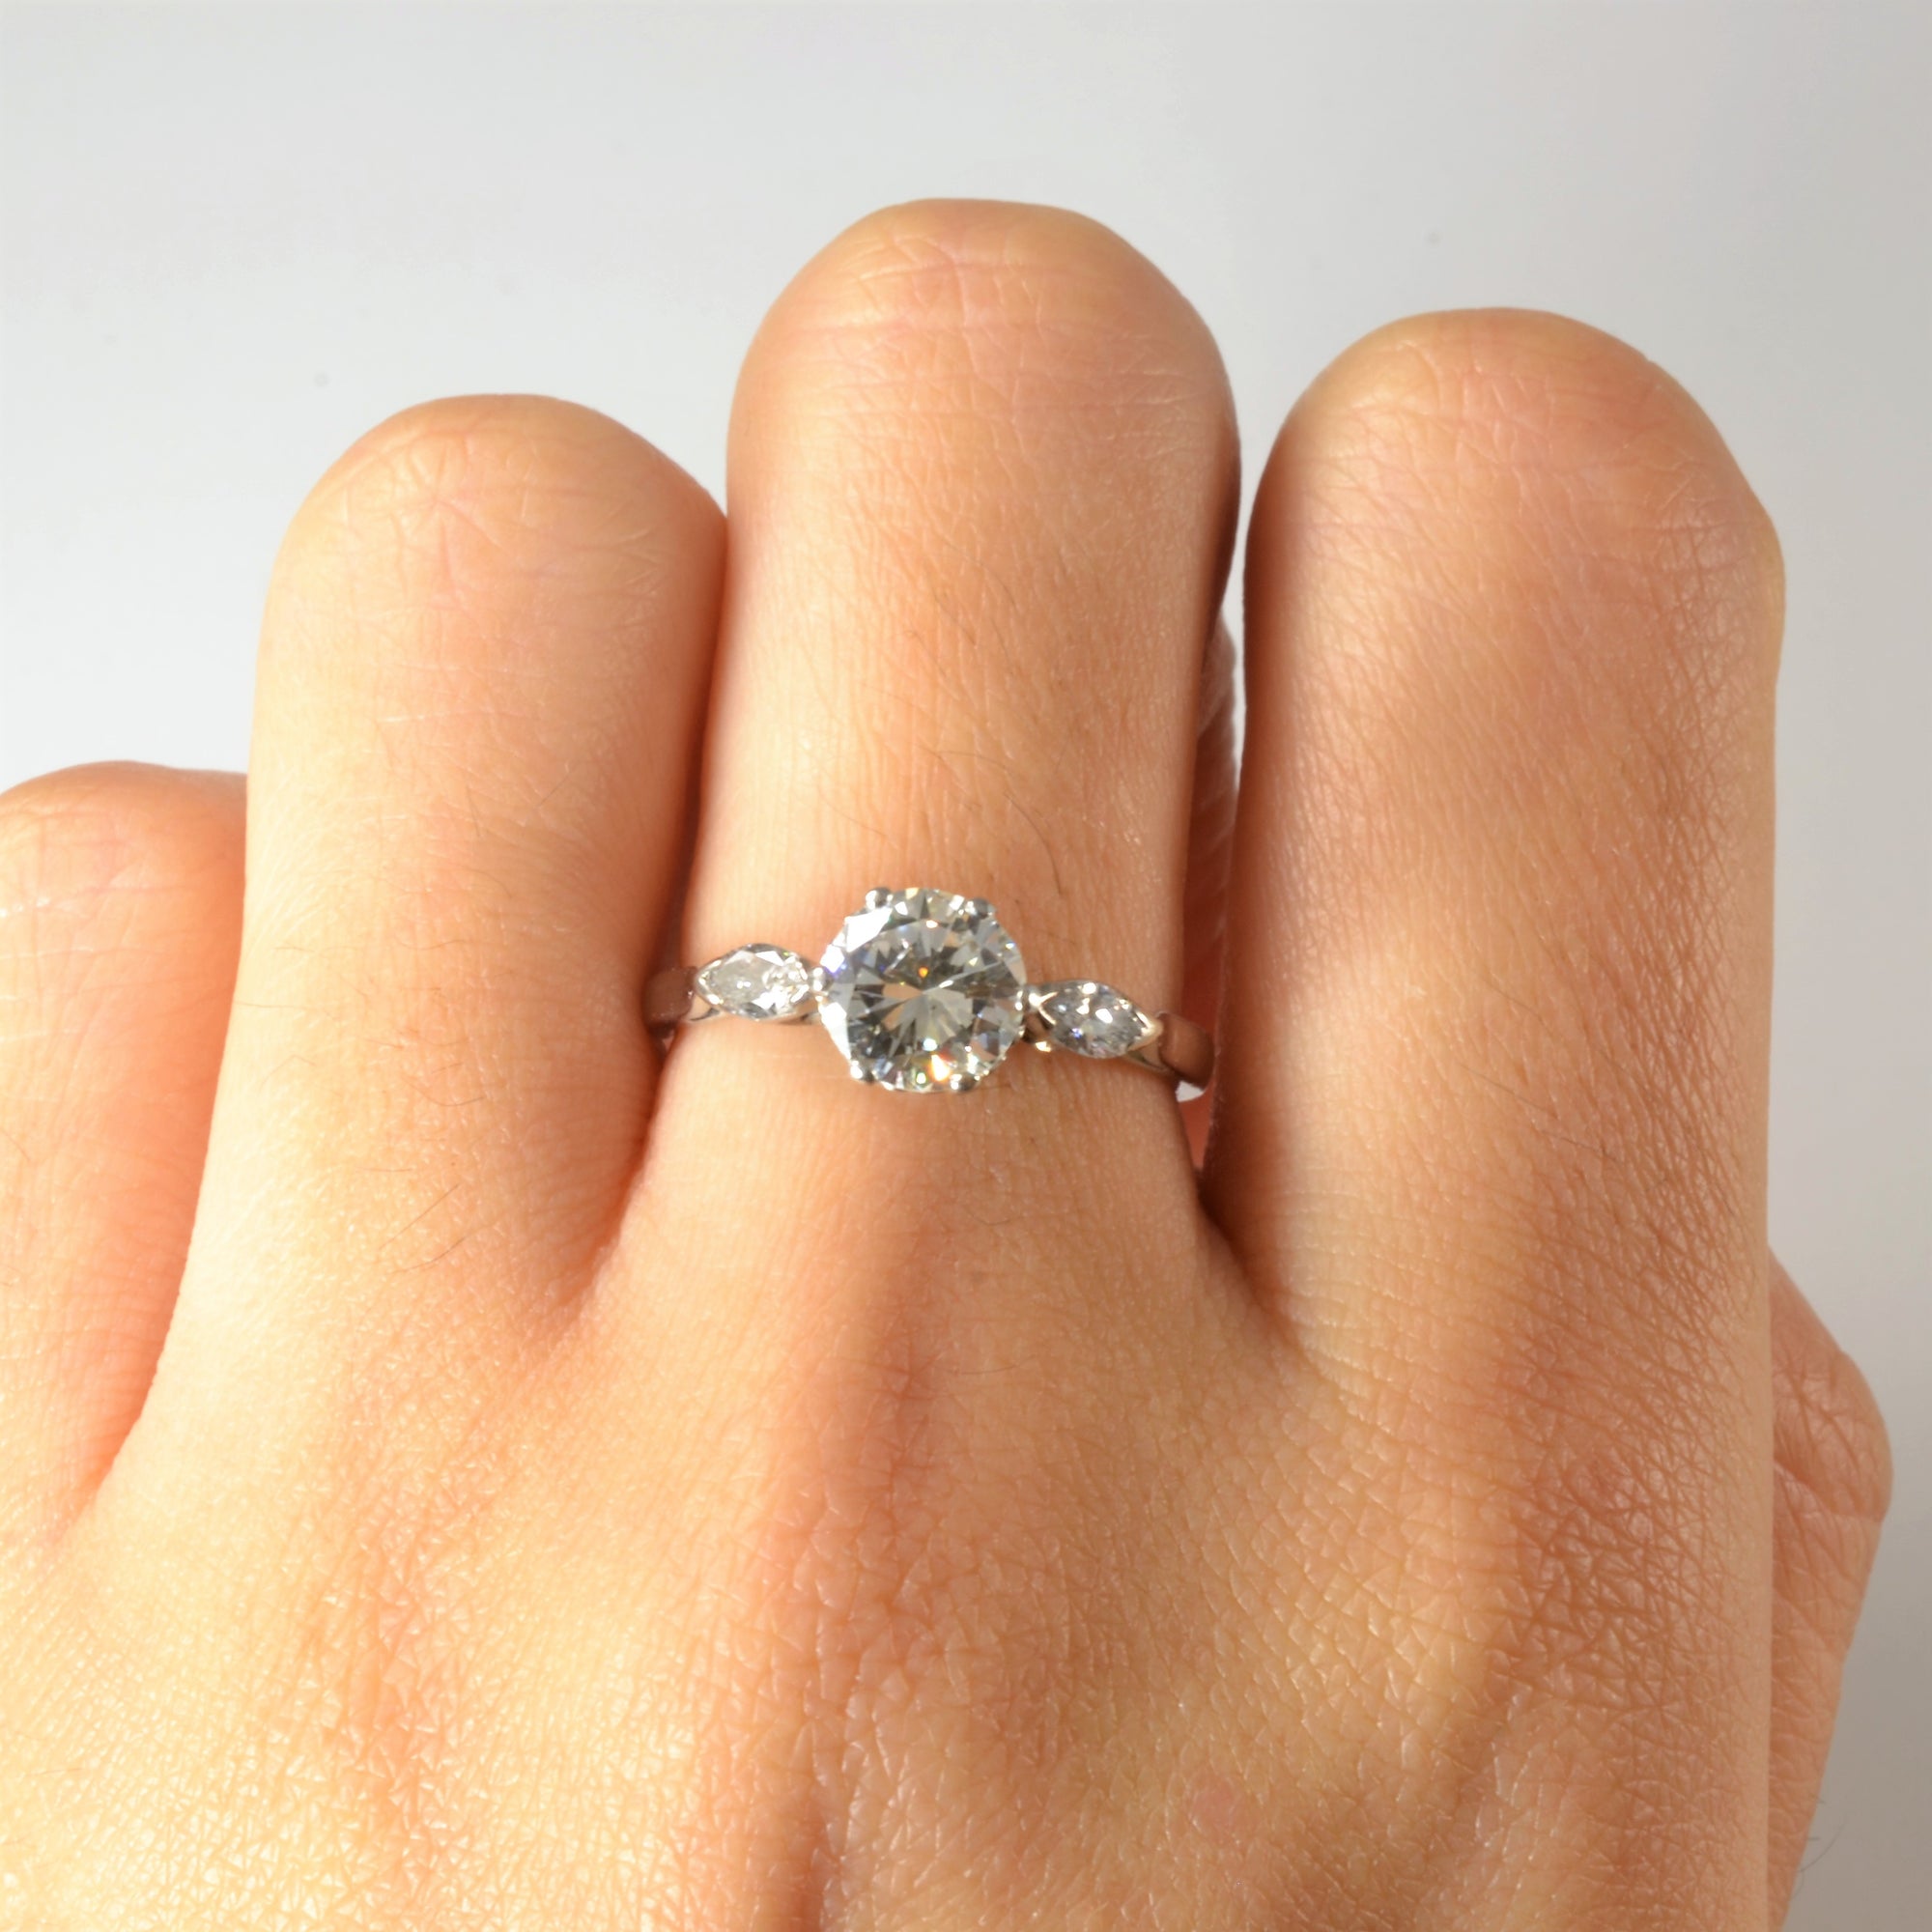 Art Deco Marquise Side Stone Engagement Ring | 1.42ctw | SZ 6.75 |